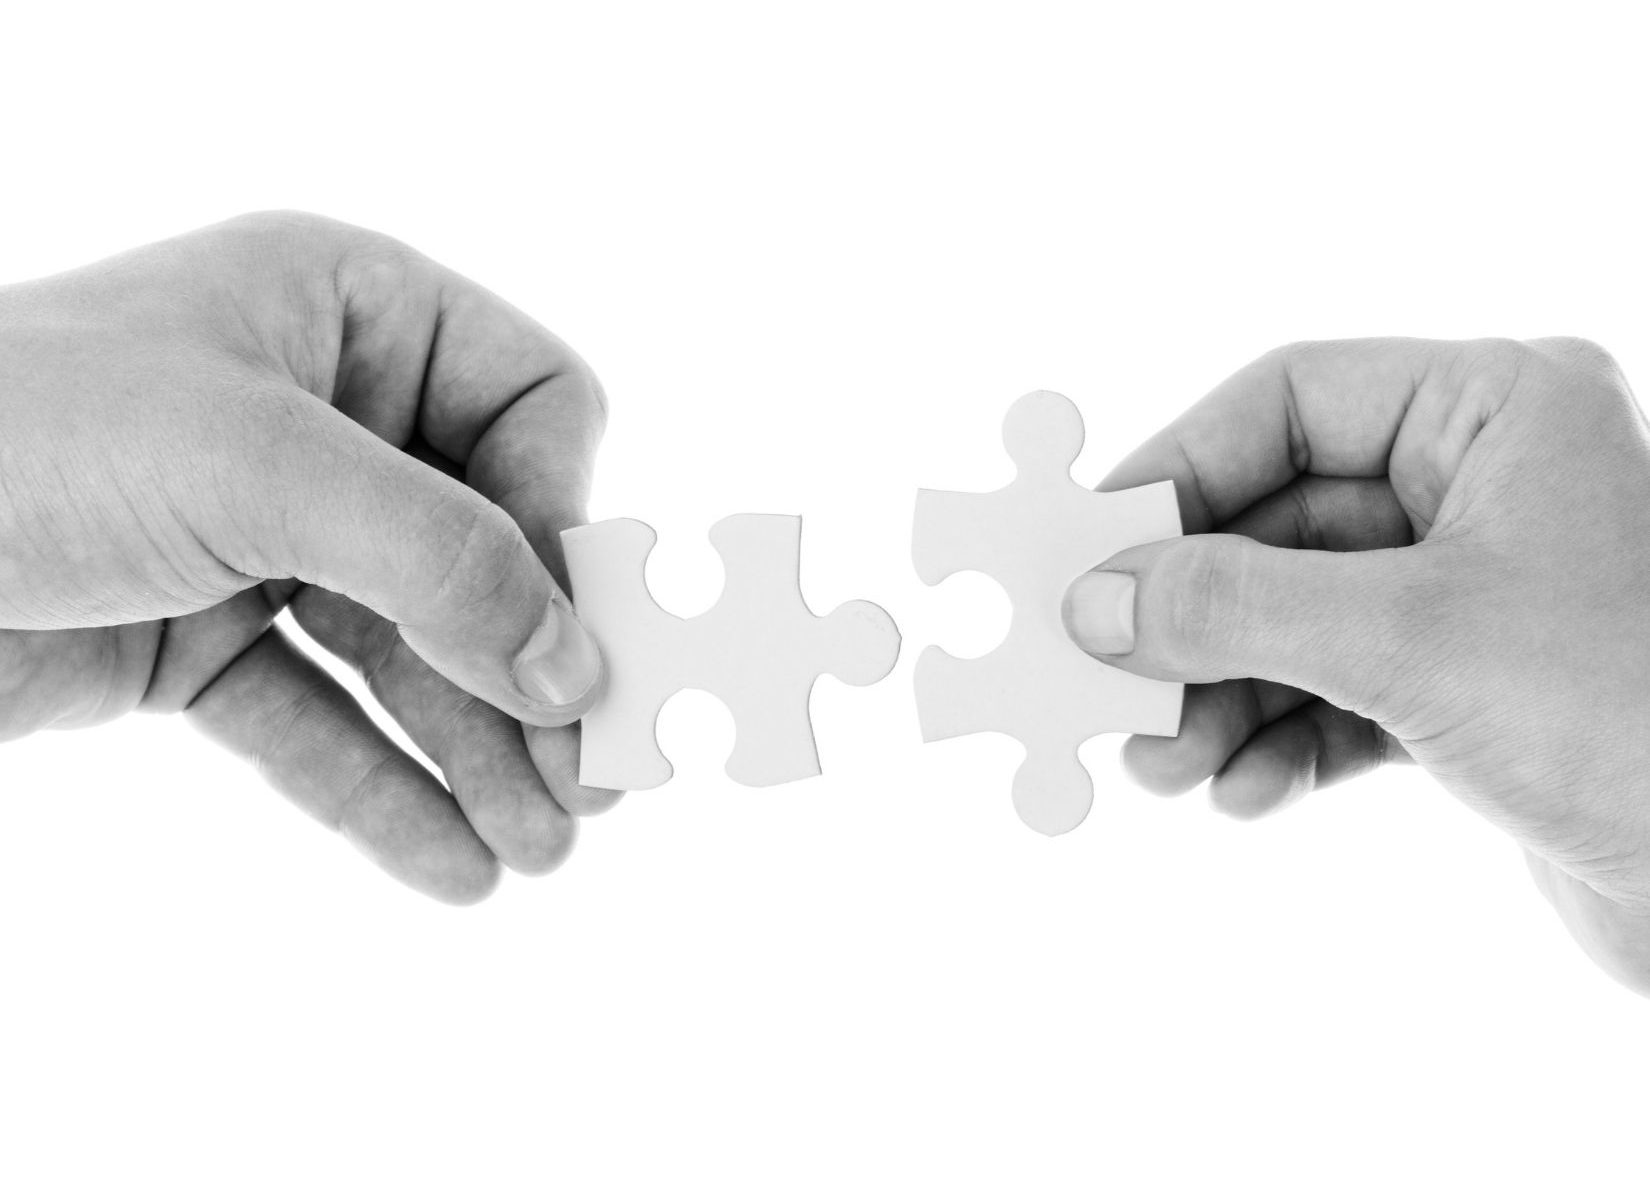 Two puzzle pieces being held by two hands in black and white